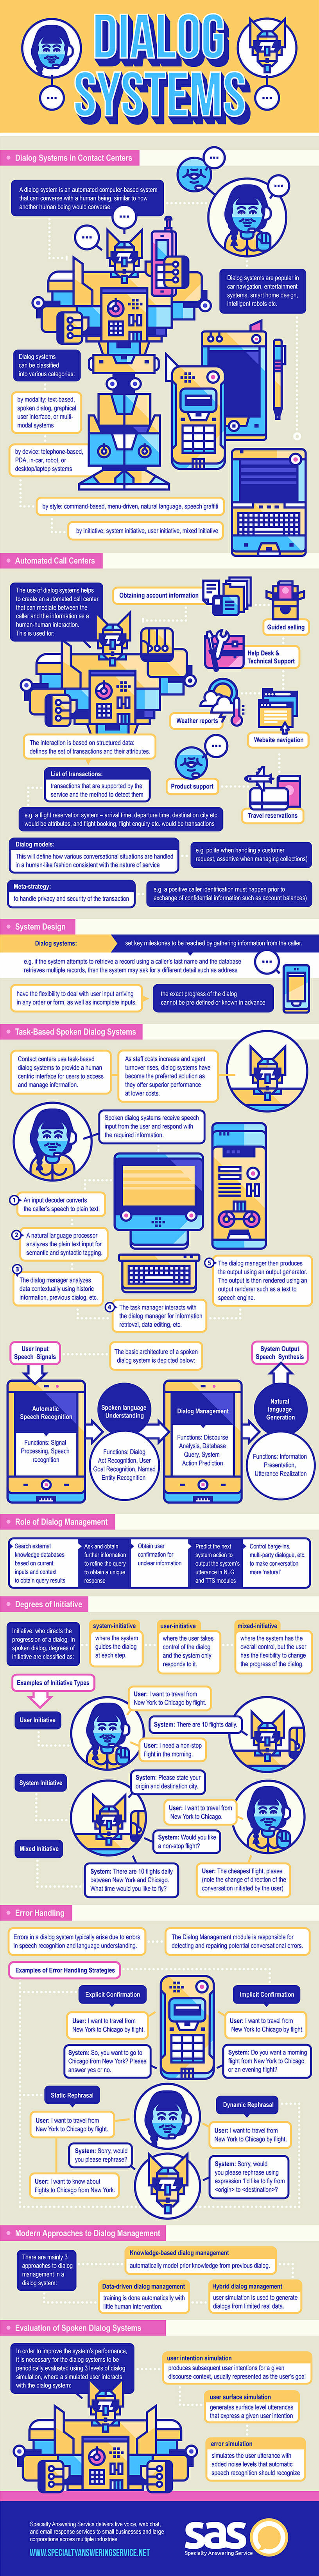 Dialog Systems Infographic